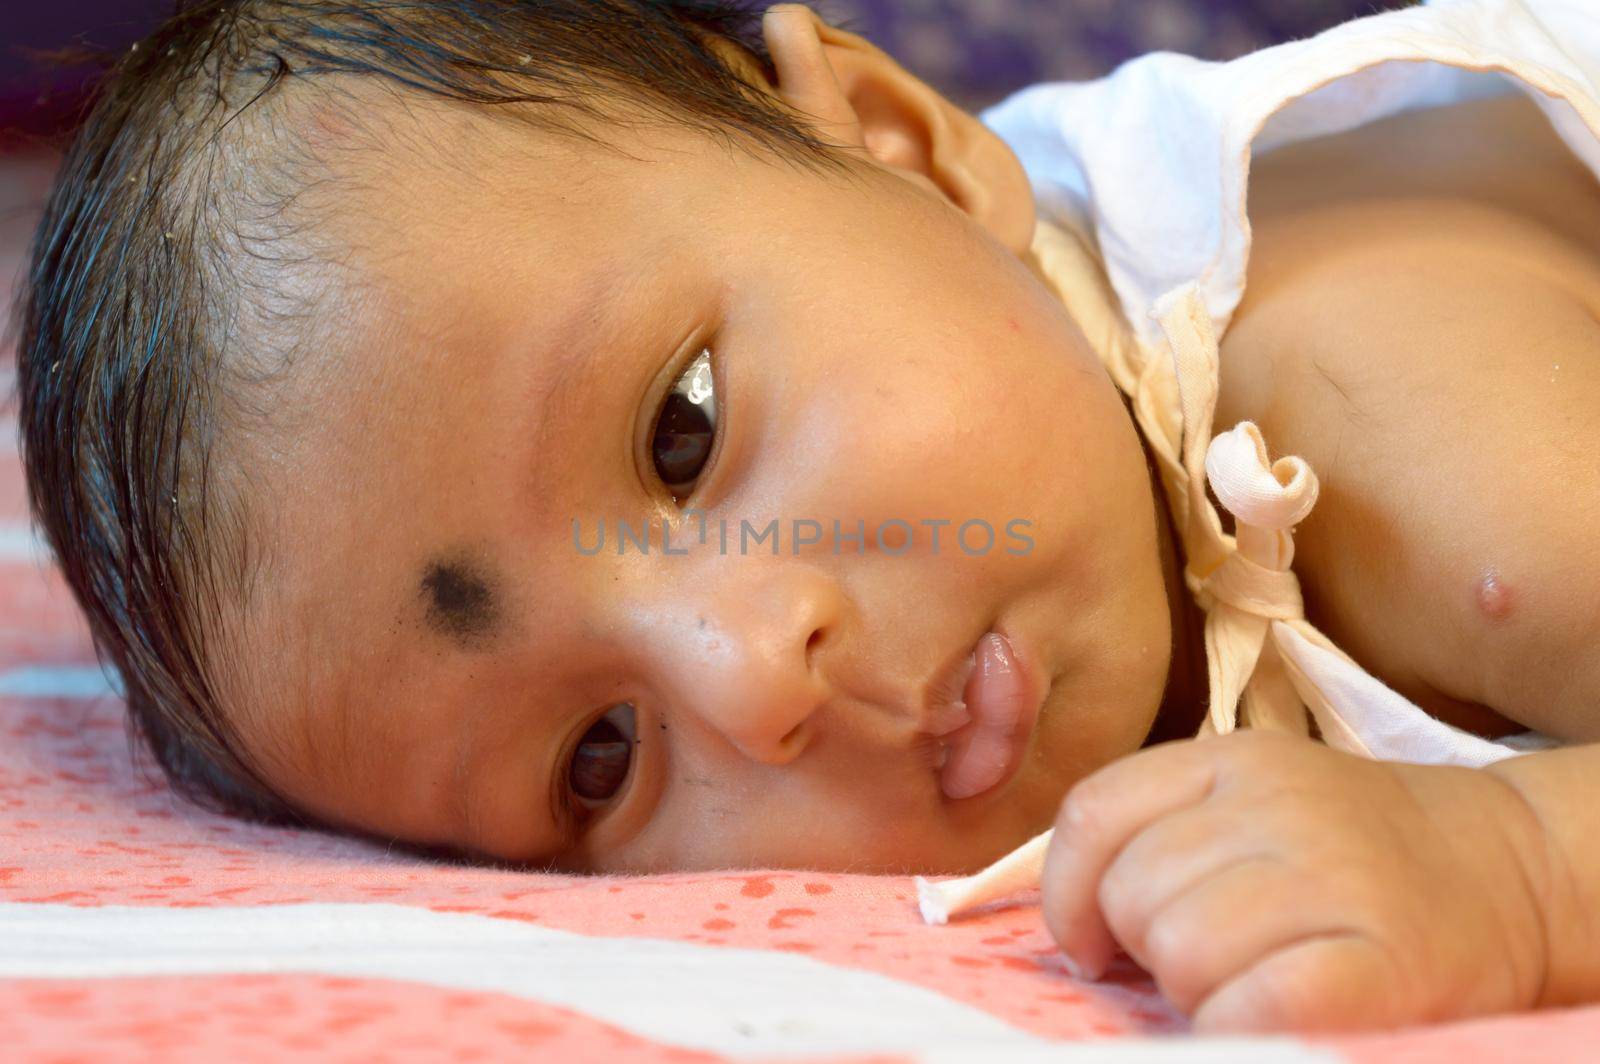 Close up face of cute newborn baby boy Lying On Front. One month old Sweet little infant toddler Closeup portrait. Indian ethnicity. Front view. Child care peace tranquil background.